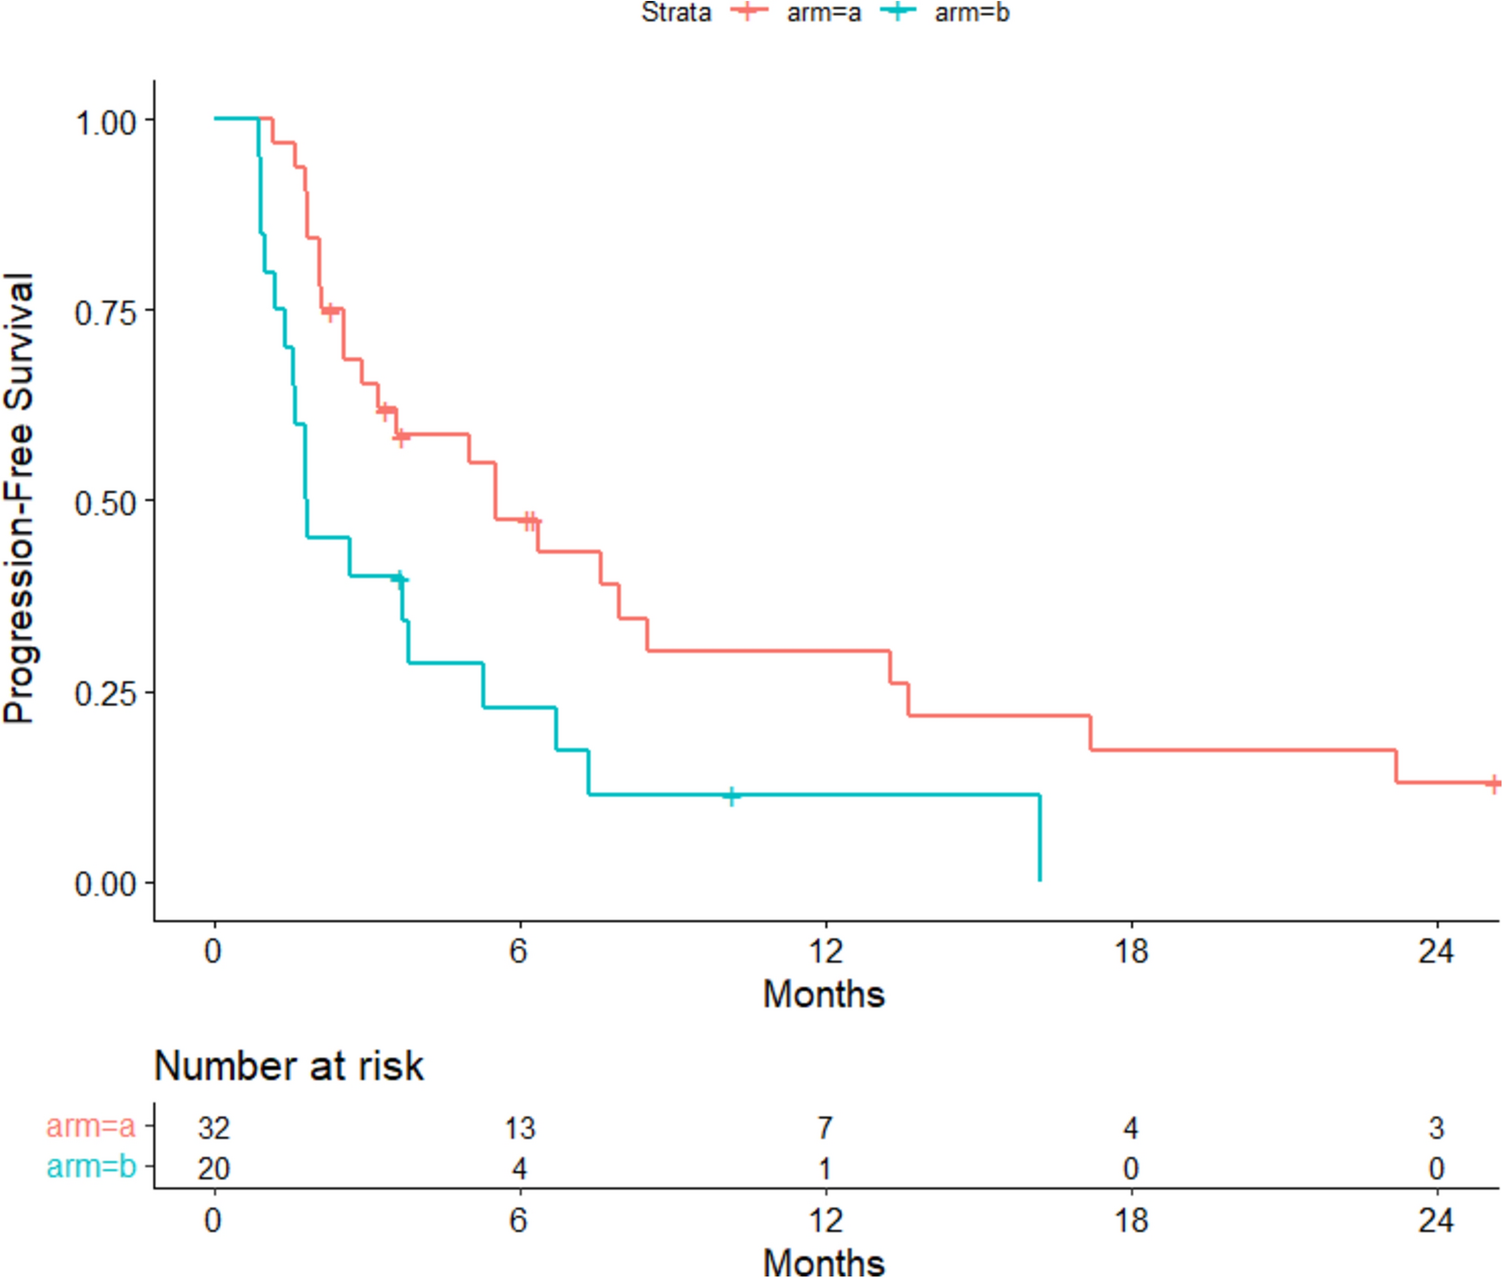 A randomized phase II study of metronomic cyclophosphamide and methotrexate (CM) with or without bevacizumab in patients with advanced breast cancer